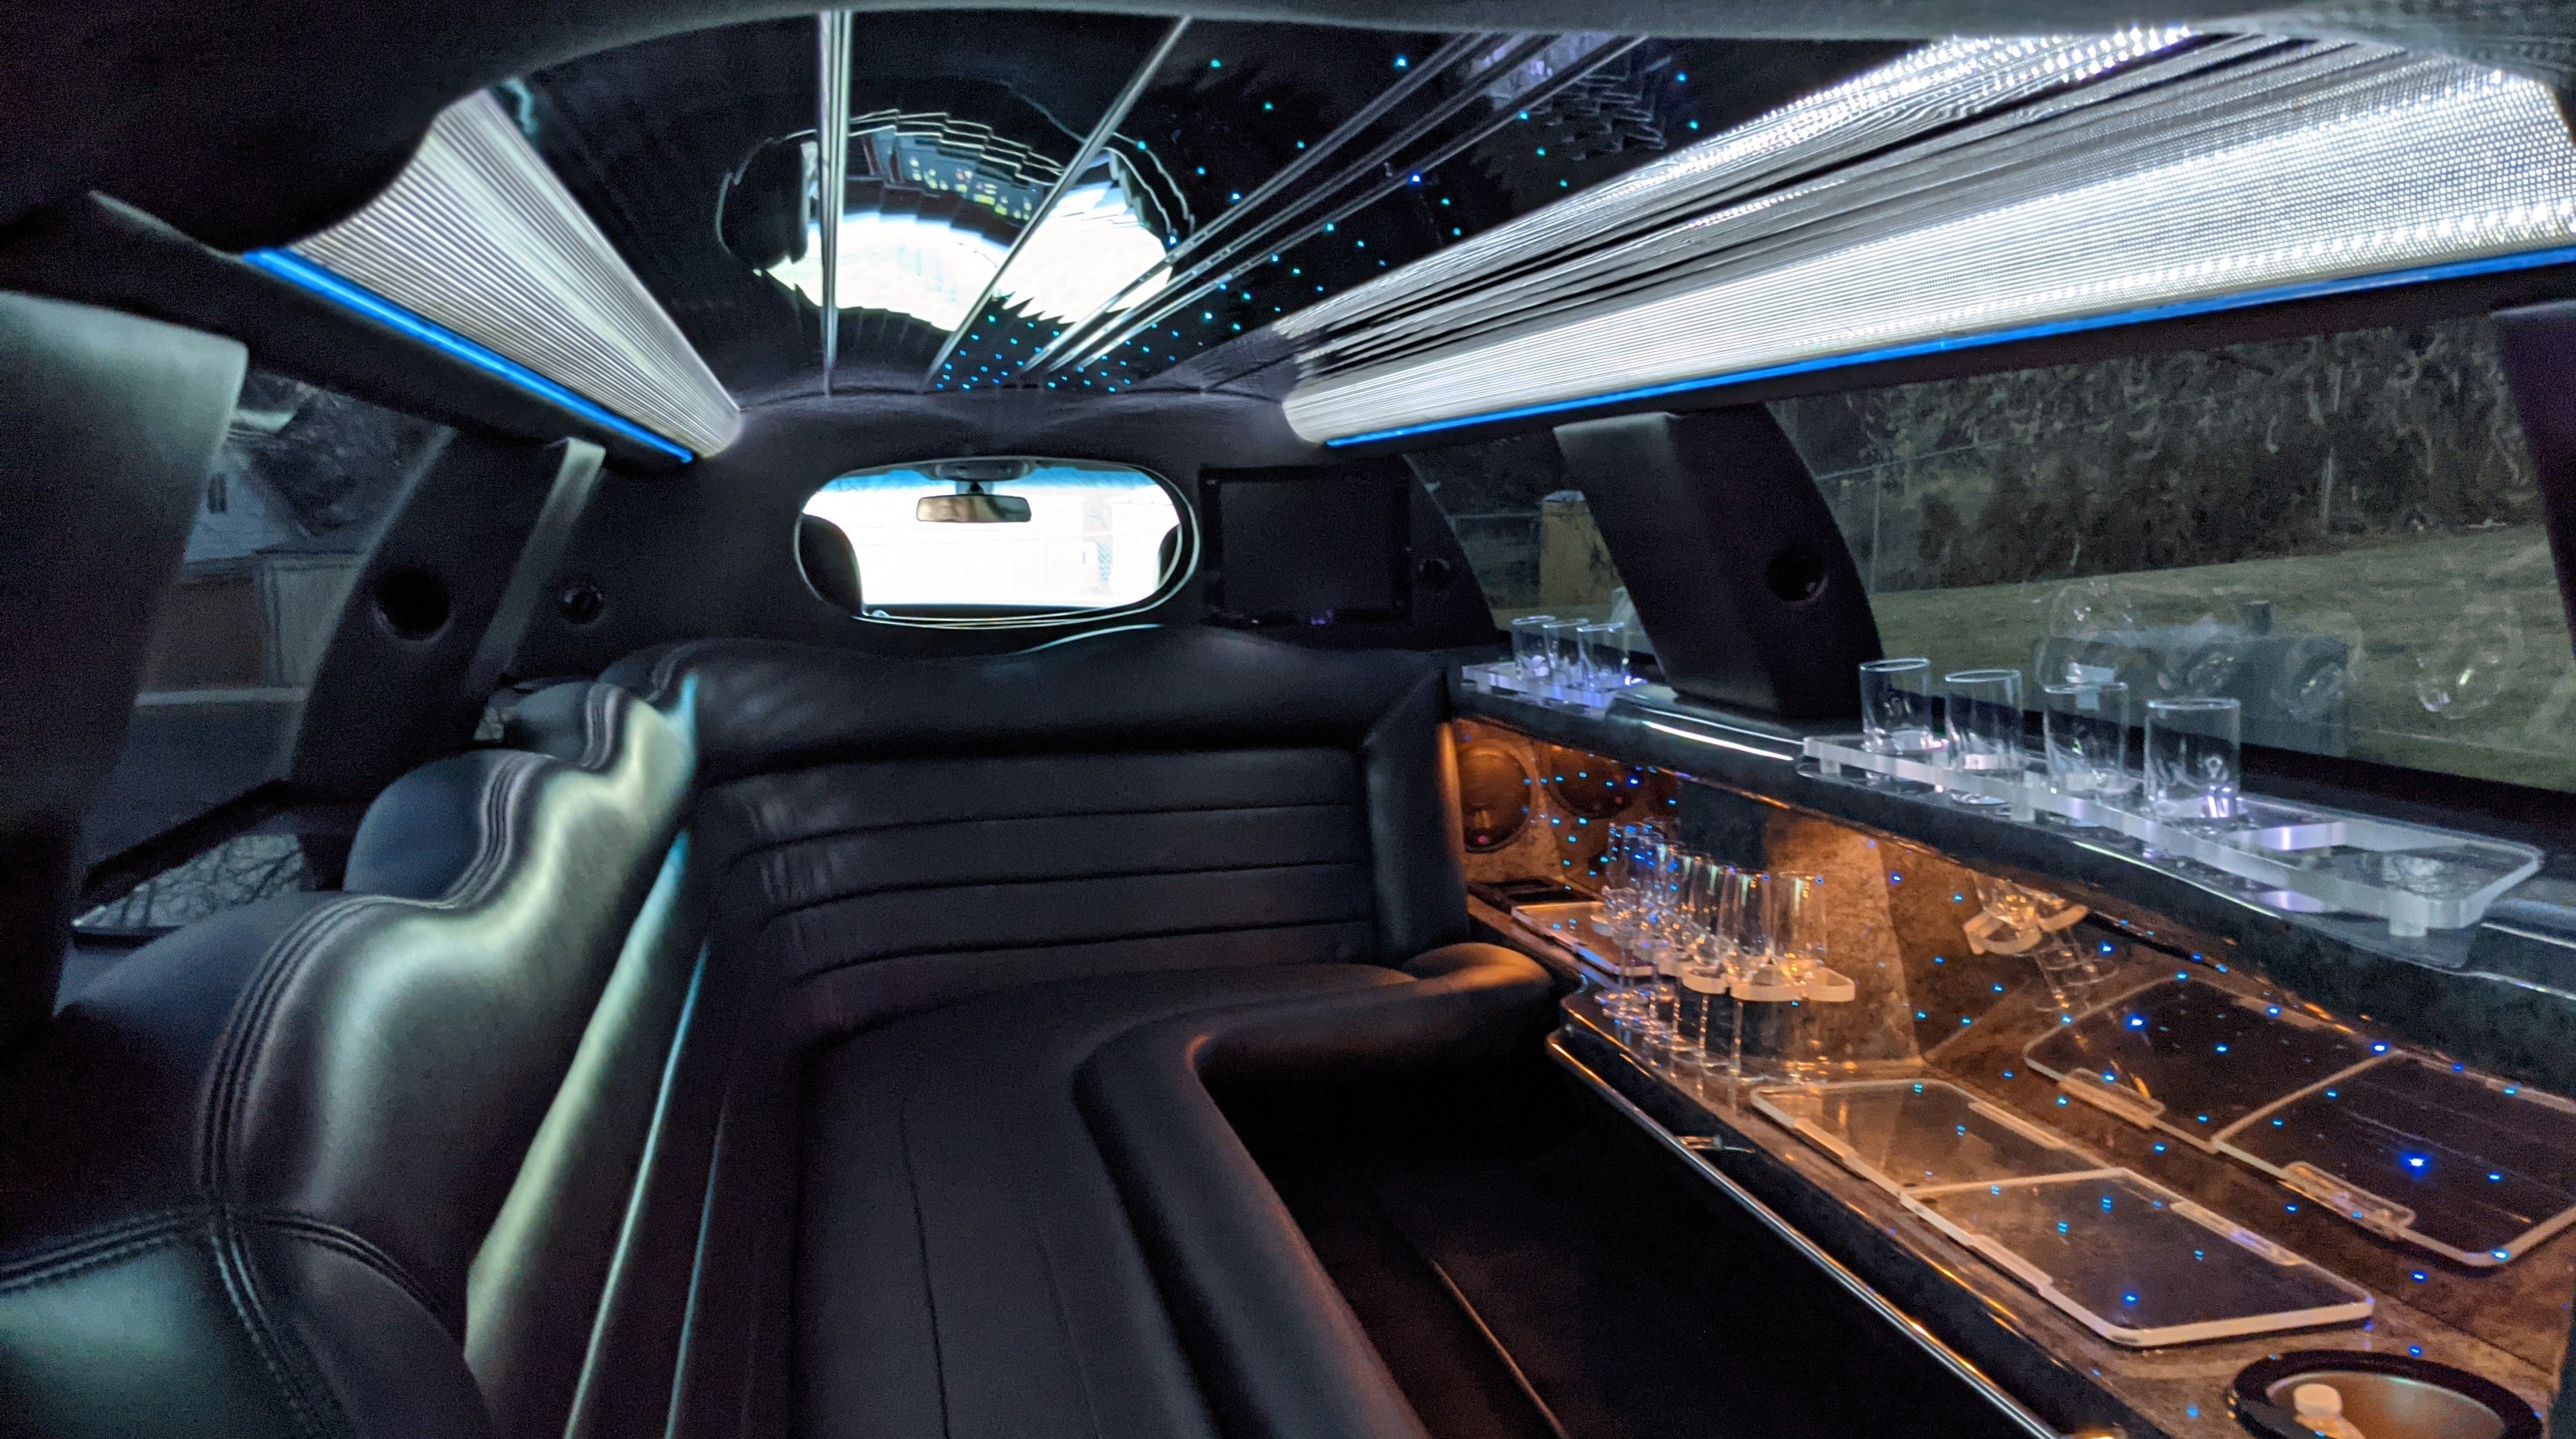 Inside of the party limousine